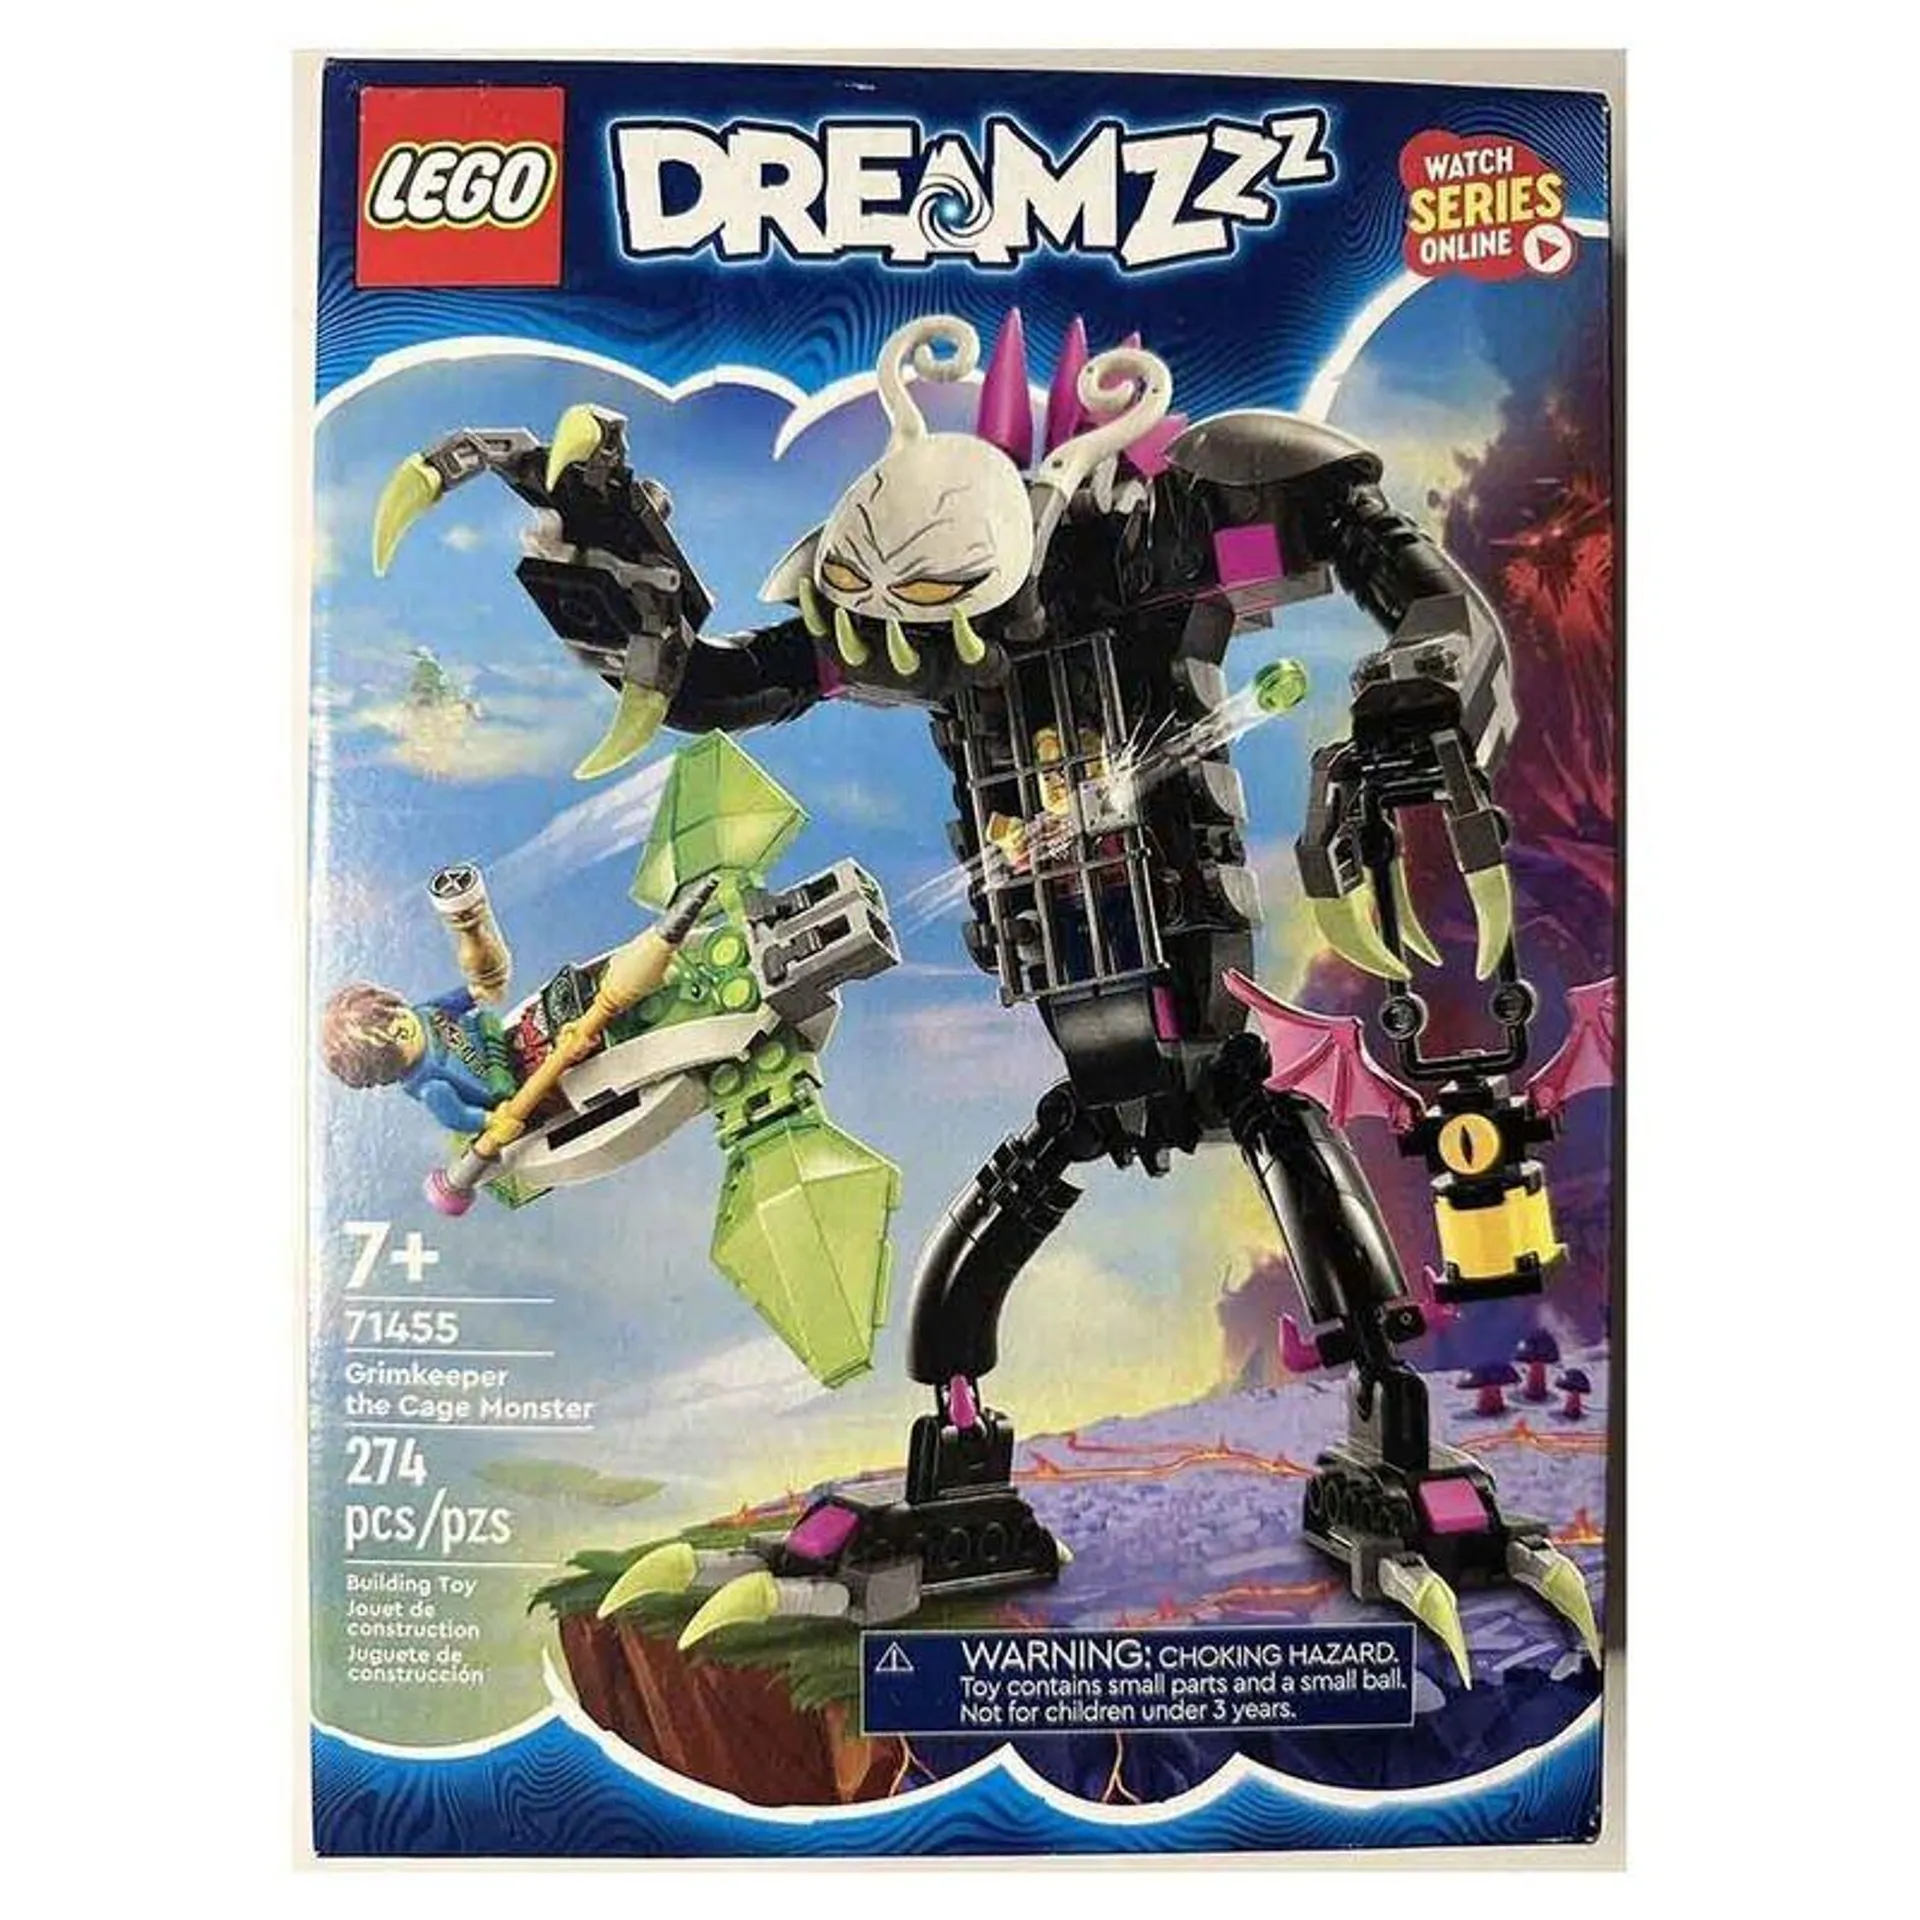 Lego Dreamzzz Grimkeeper the Cage Monster Lego LE71455